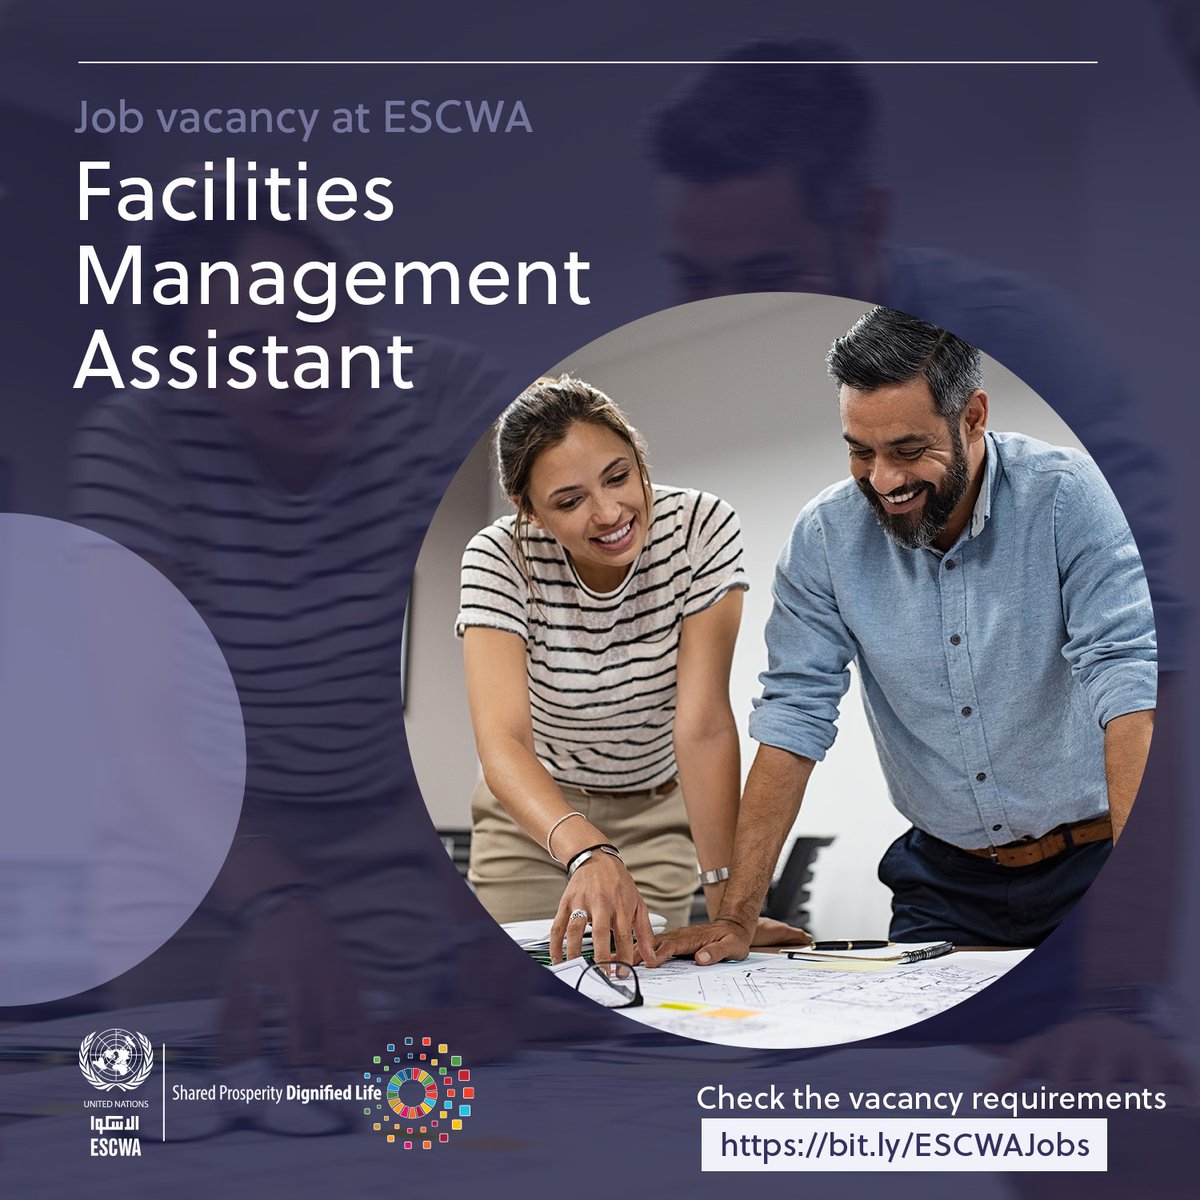 📢 Job vacancy at #ESCWA! Title: Facilities Management Assistant Experience: 5+ years in facilities management, building management, engineering or architecture 📆 Deadline: 22 May 🔗: bit.ly/ESCWAJobs